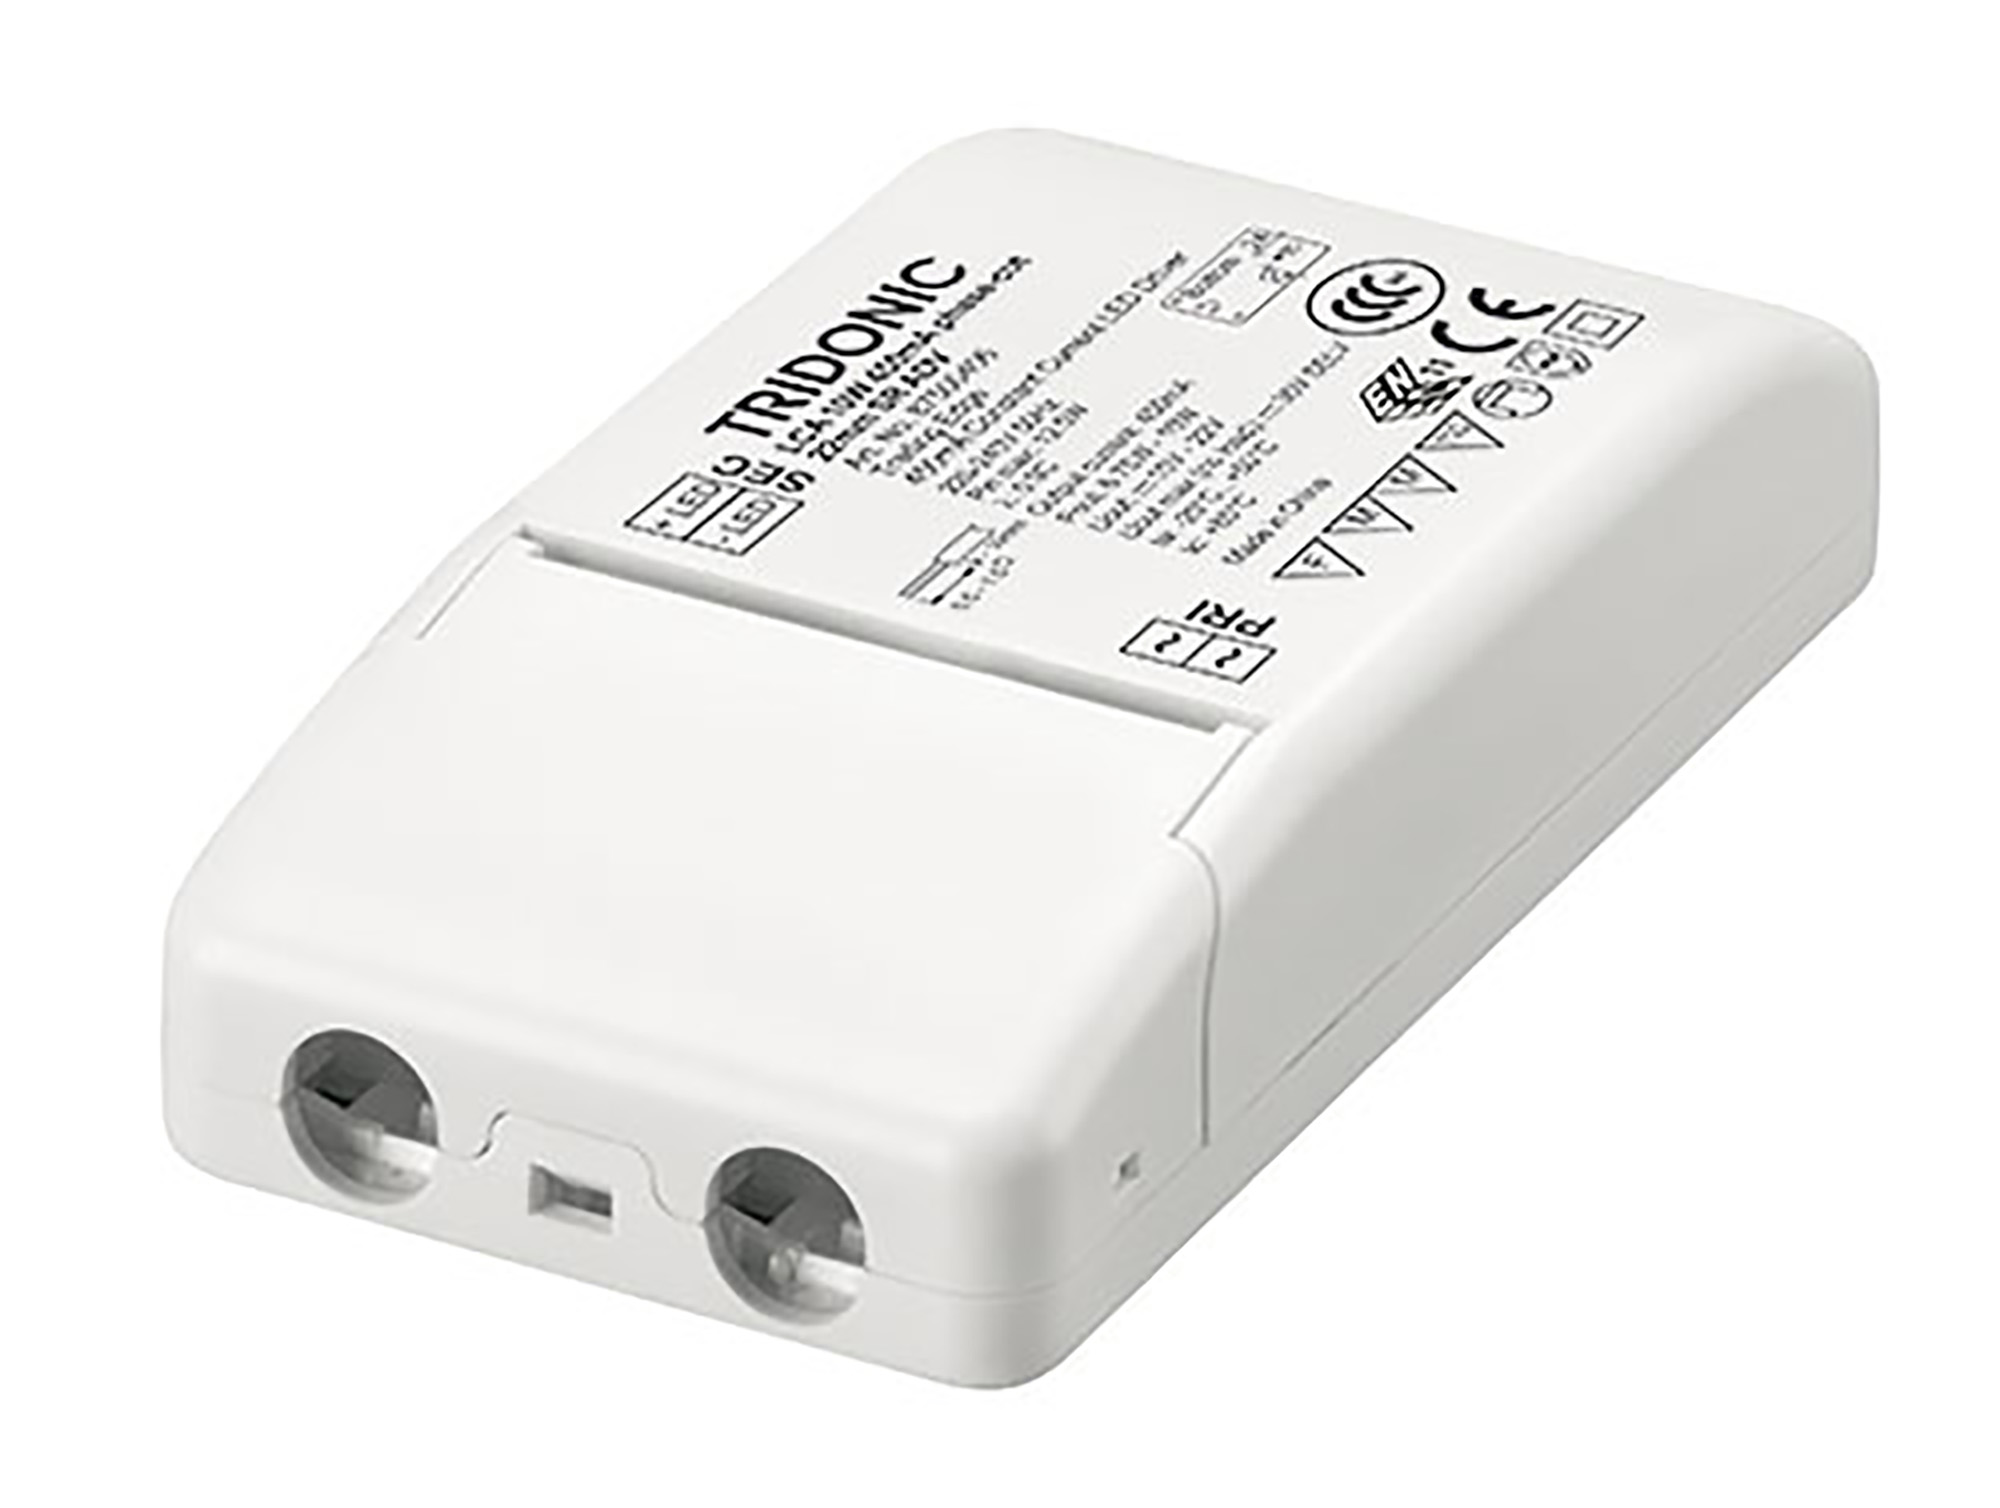 87500407  18W 450mA Phase Cut SR ADV Constant Current LED Driver